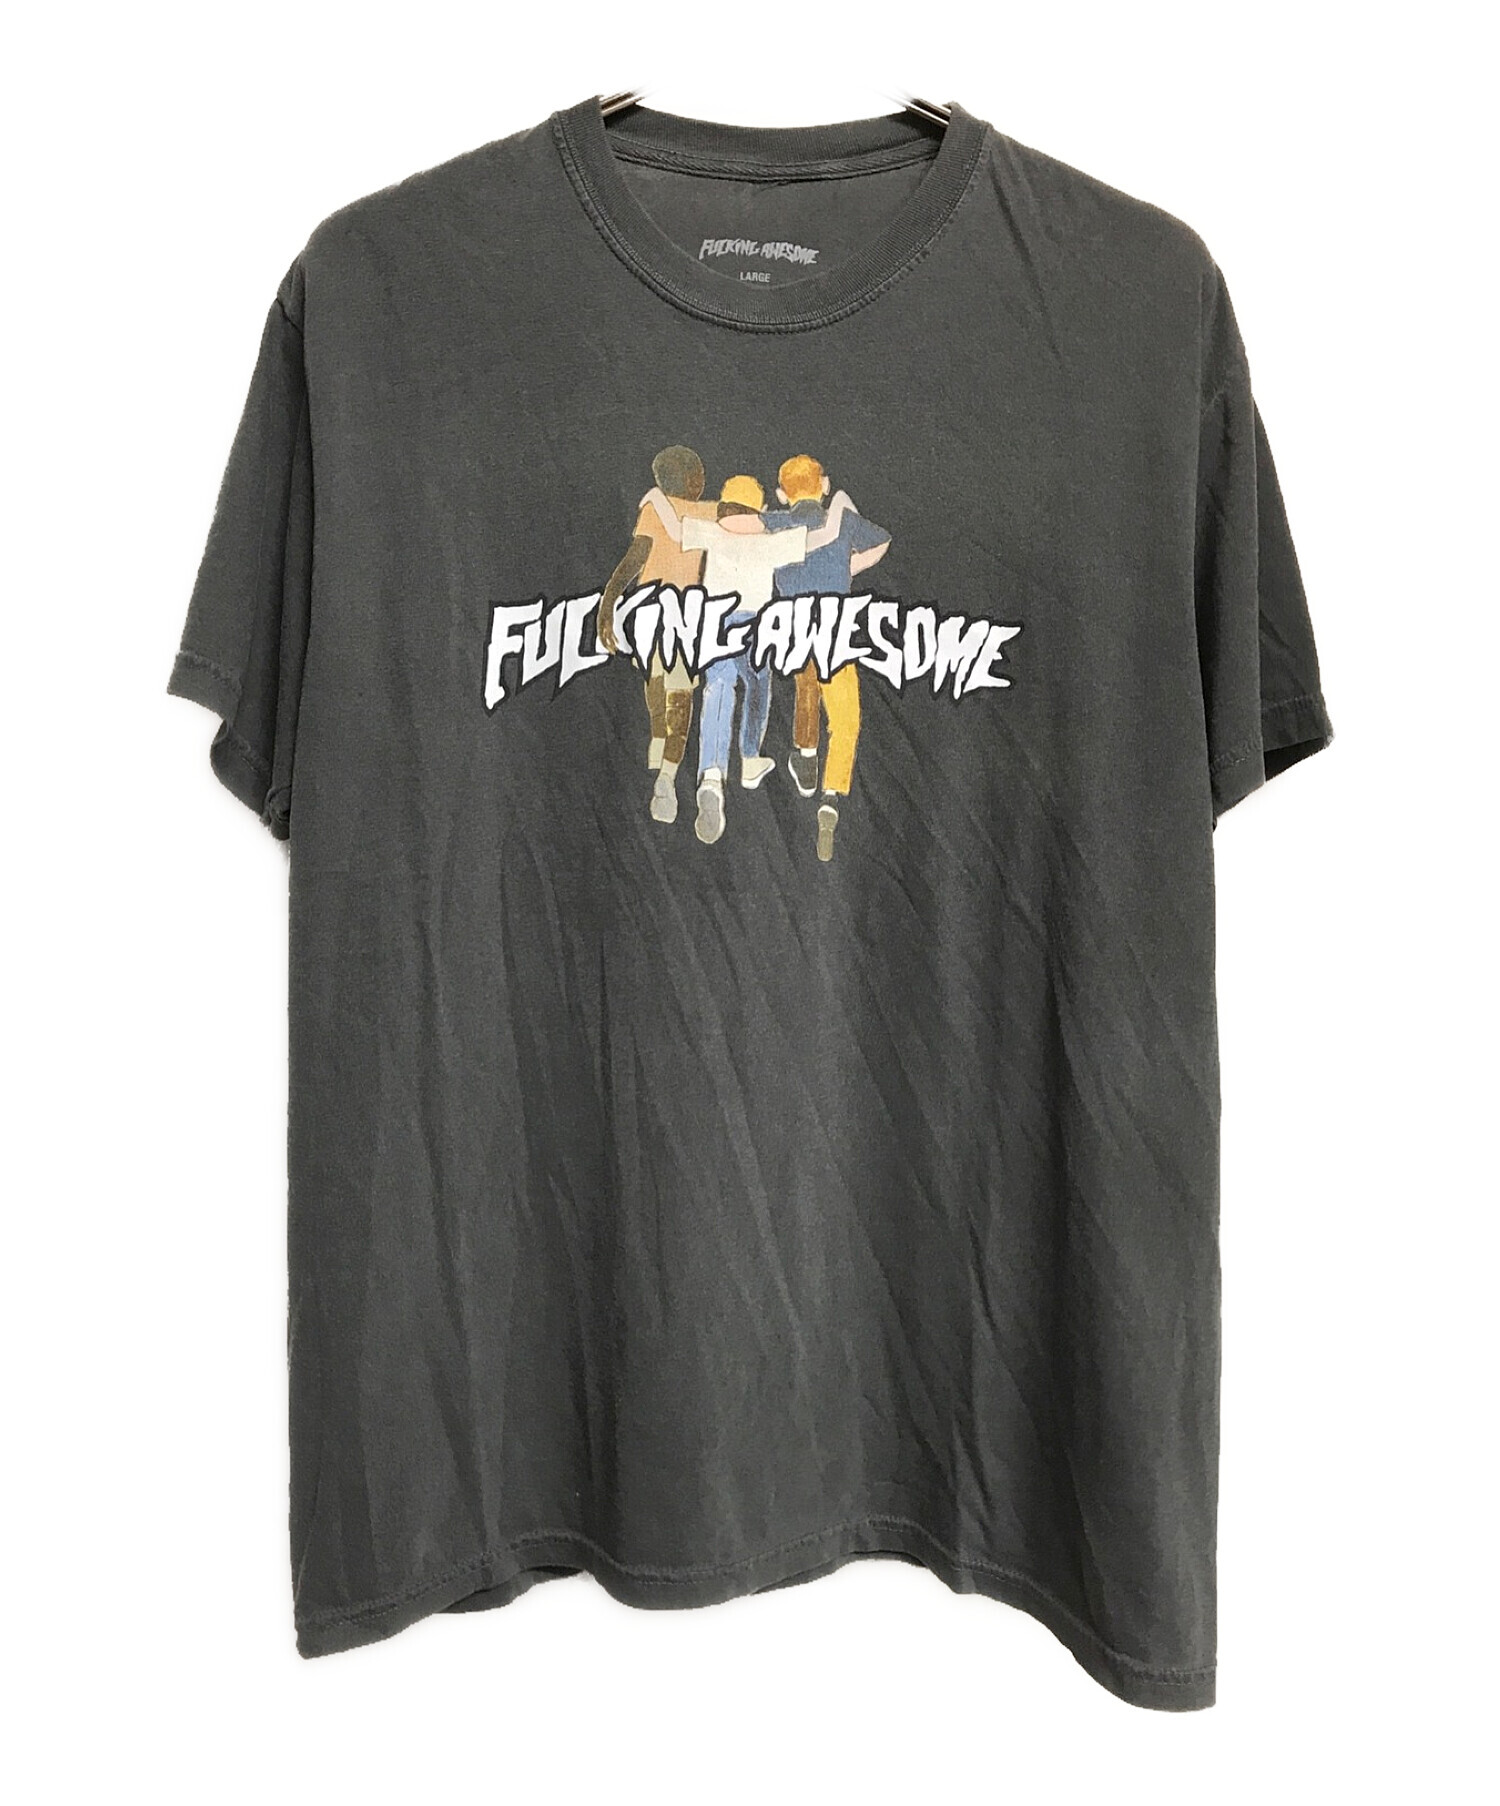 fucking awesome ファッキングオーサム Tシャツ - Tシャツ/カットソー